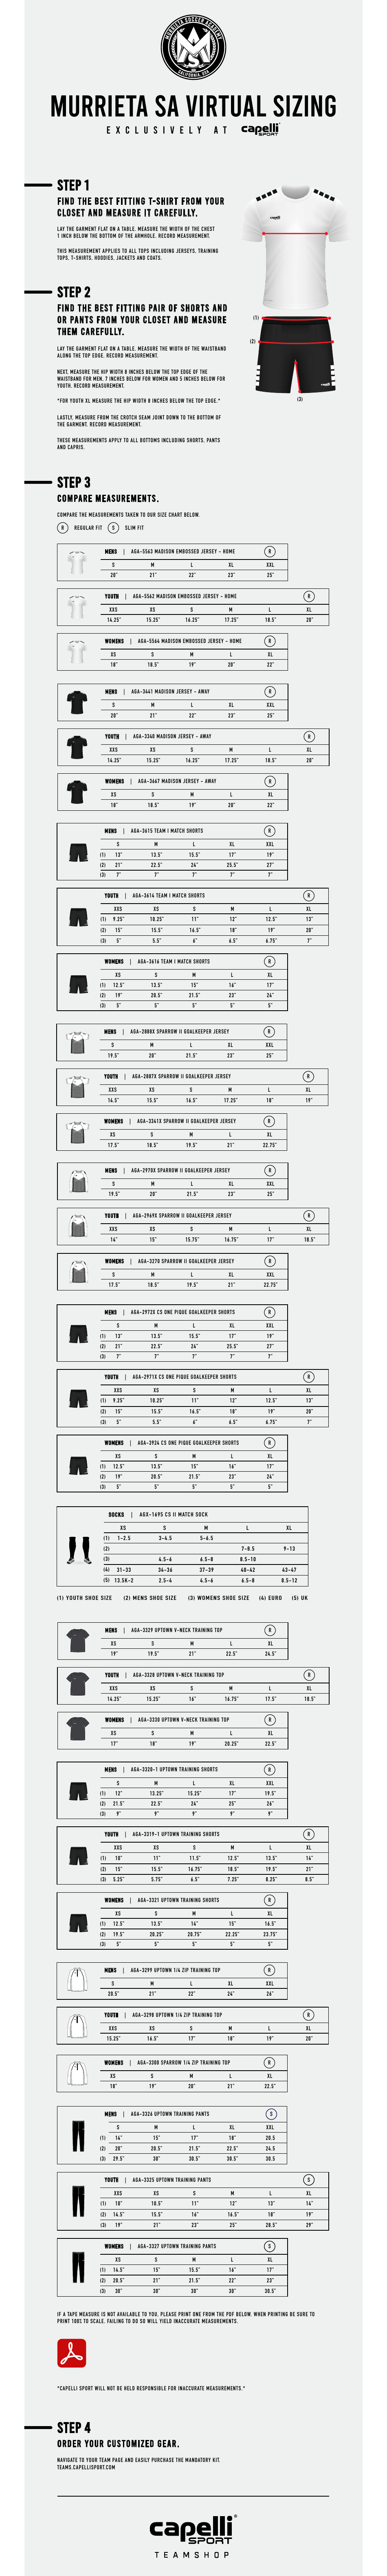 Capelli Sport's Sportswear Size Chart - Easily Determine Your Size